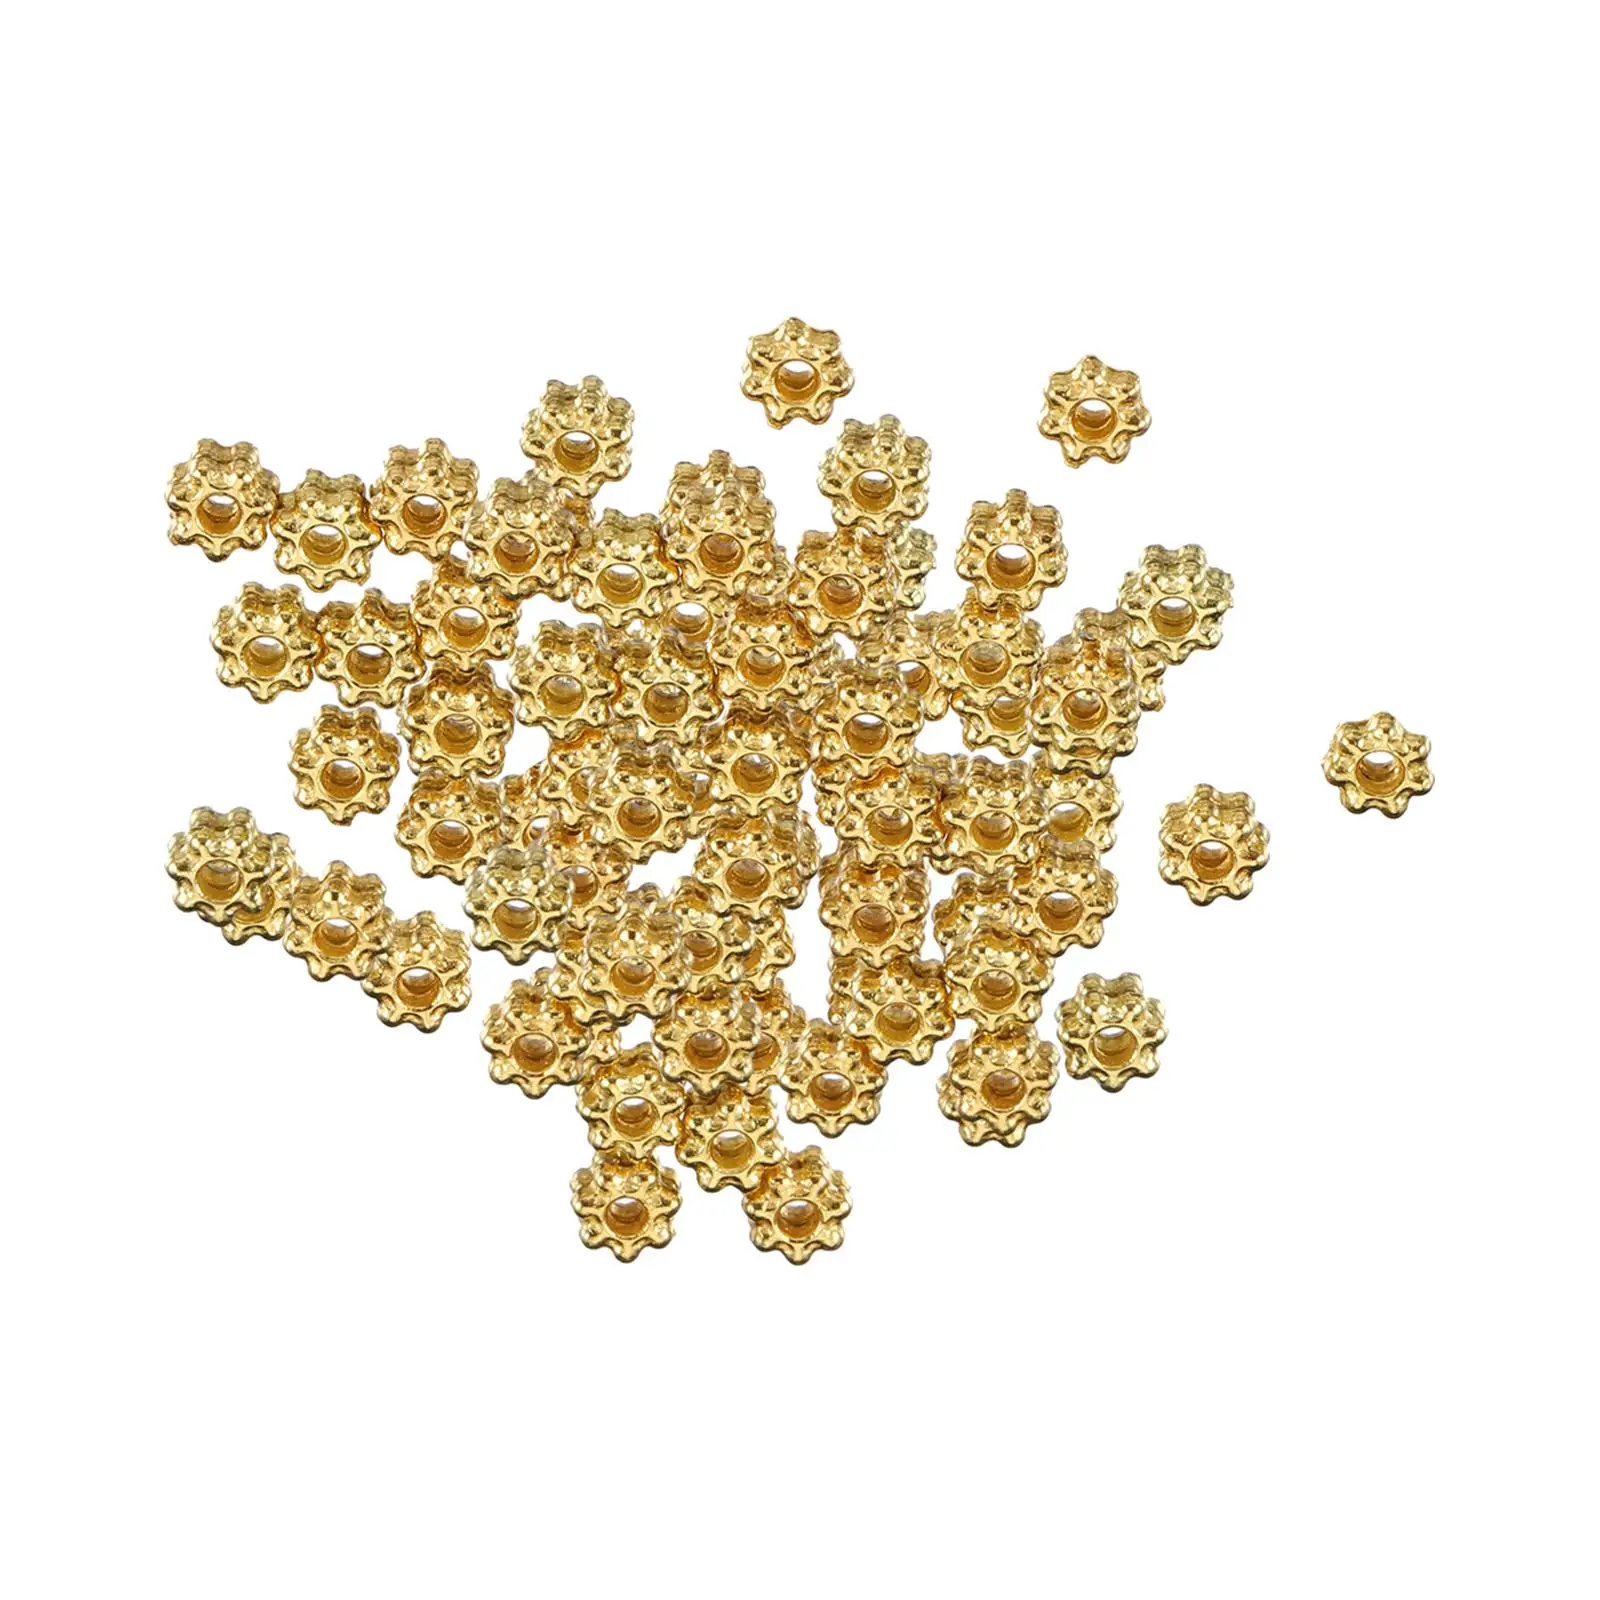 200Pcs Snowflake Spacer Beads DIY Craft Metal Decorative Loose Charm Beads for Jewelry Making Necklace Earring Bags Accessories